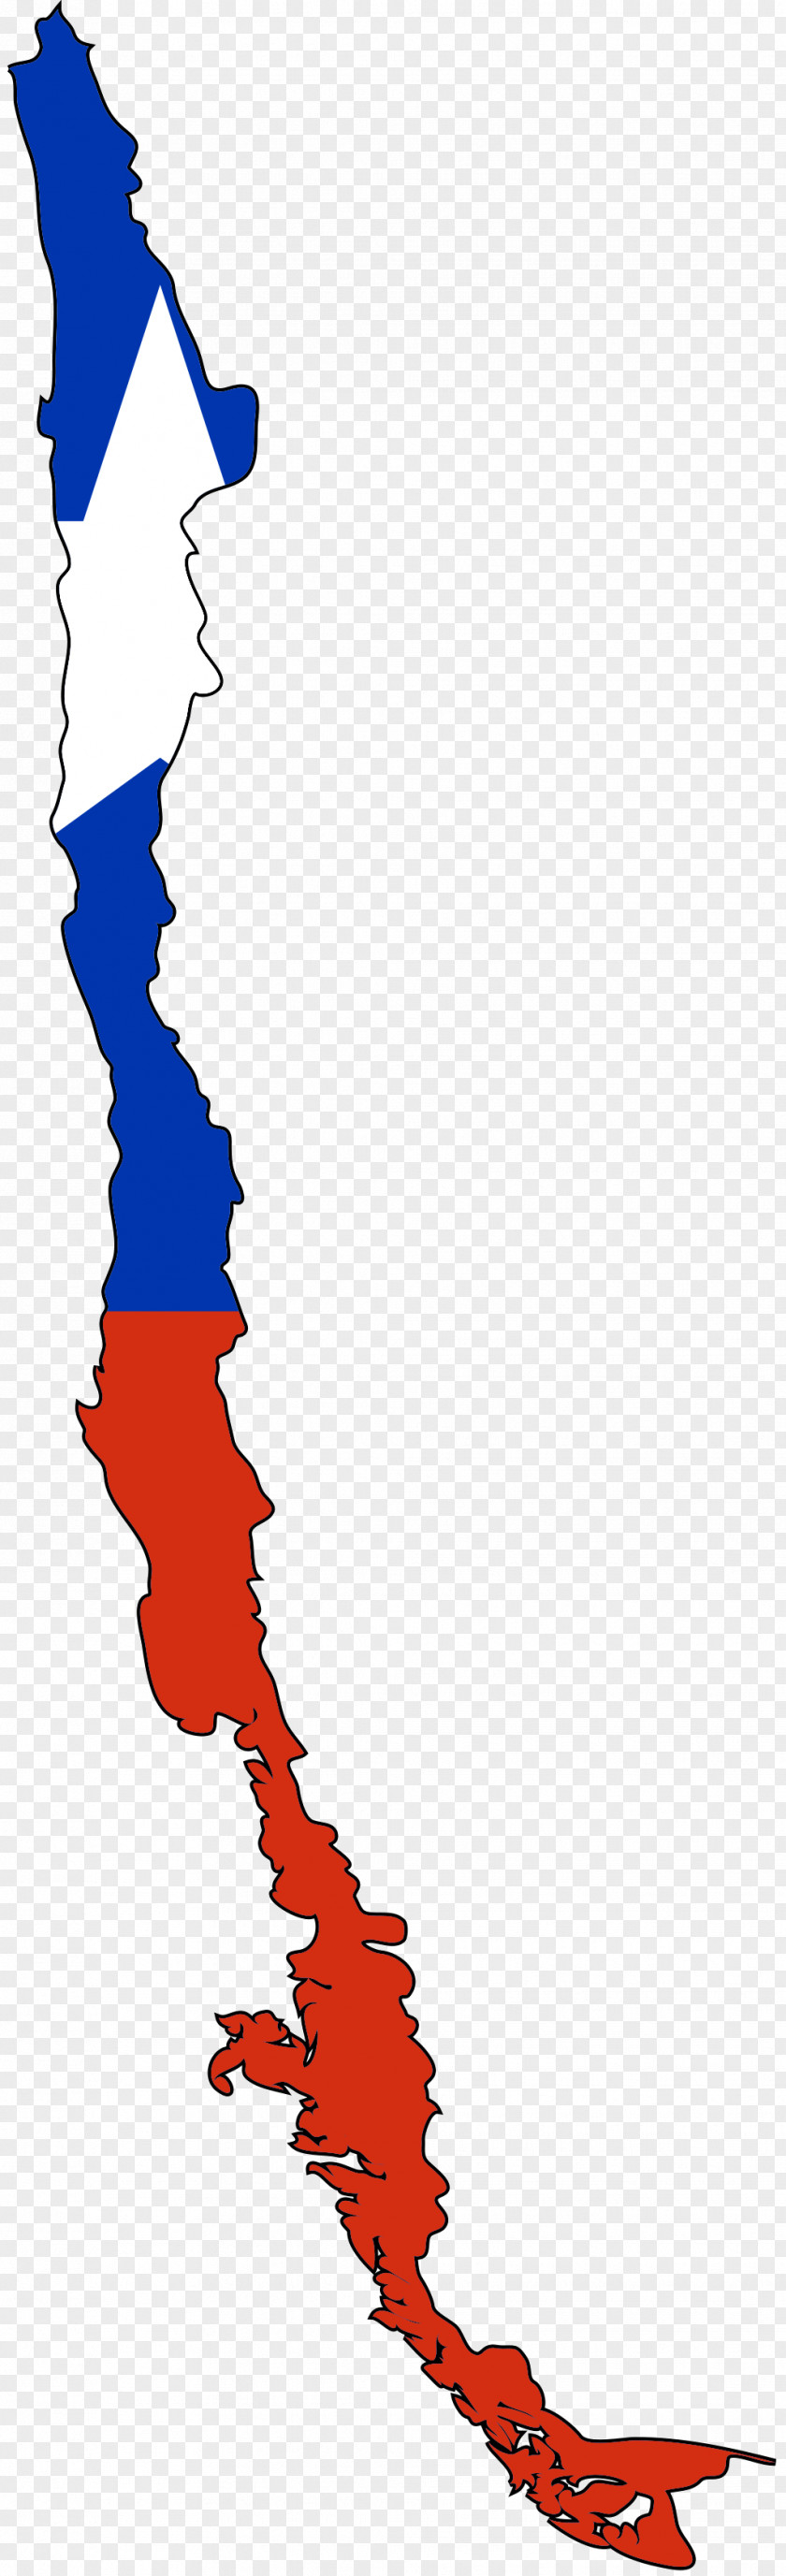 Chili Flag Of Chile Clip Art PNG